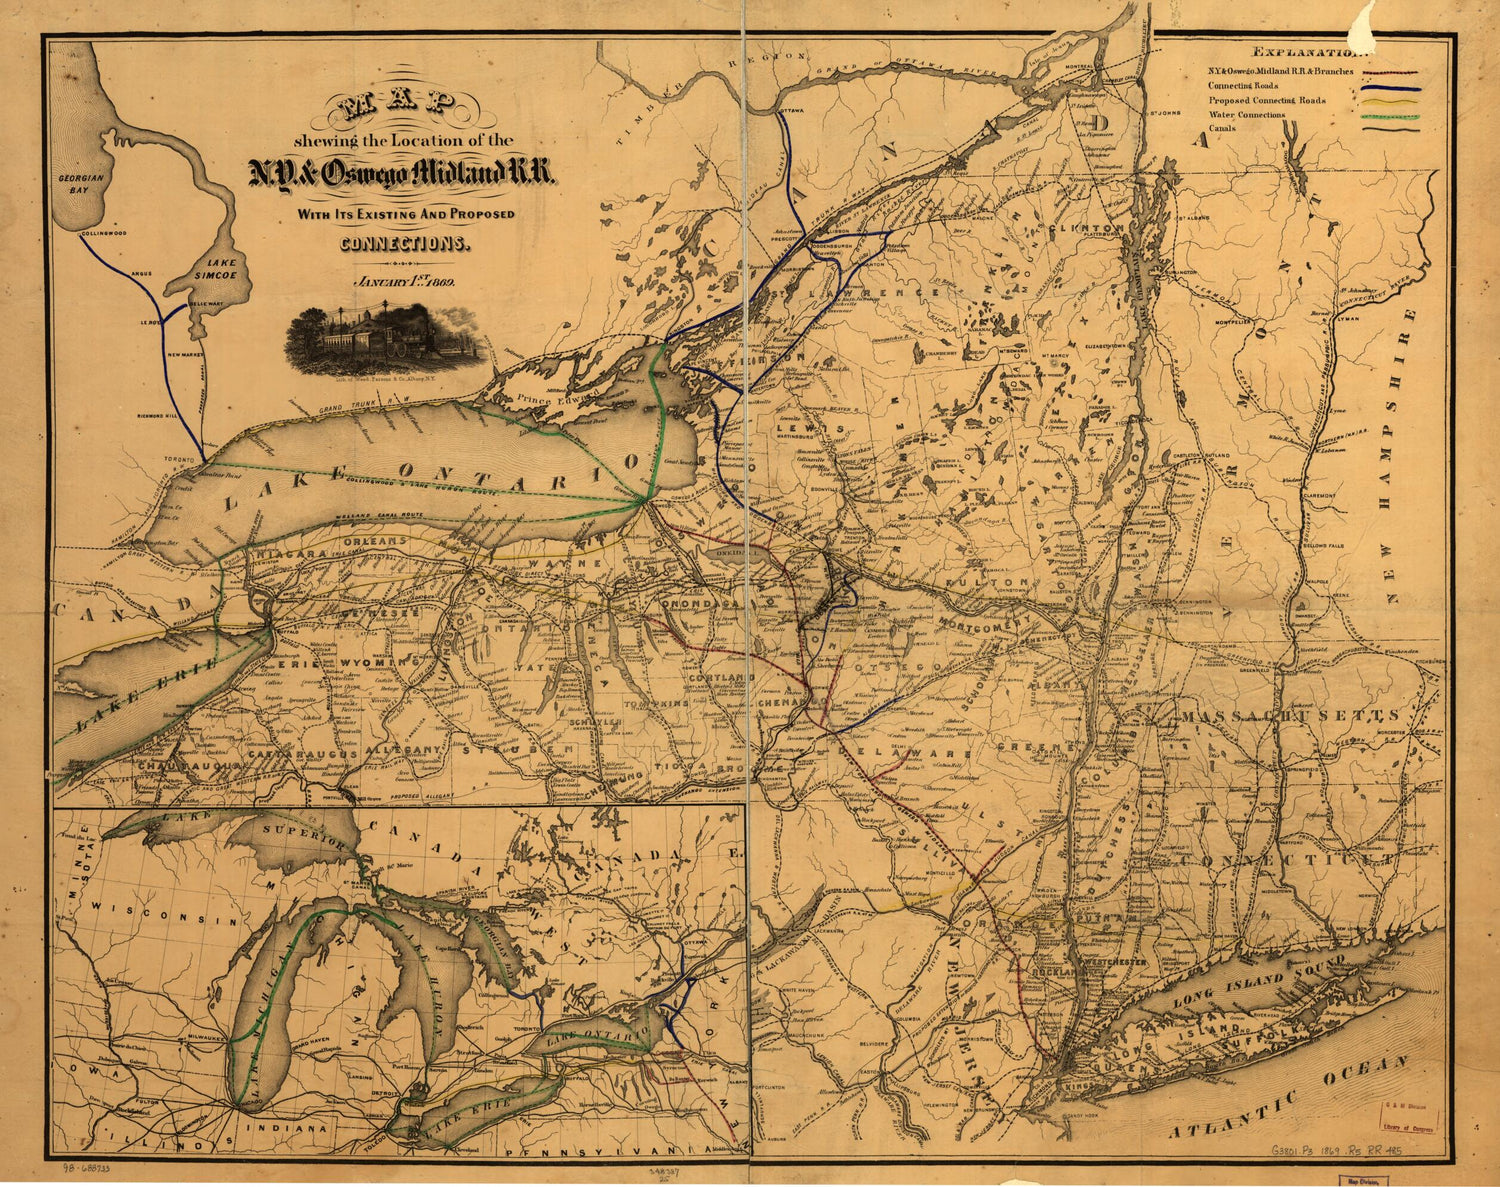 This old map of Map Showing the Location of the New York &amp; Oswego Midland R.R. With Existing and Proposed Connection, January 1st from 1869, by Van R. Richmond, State Eng was created by William B. Gilbert,  New York &amp; Oswego Midland Railroad, Van R. Rich